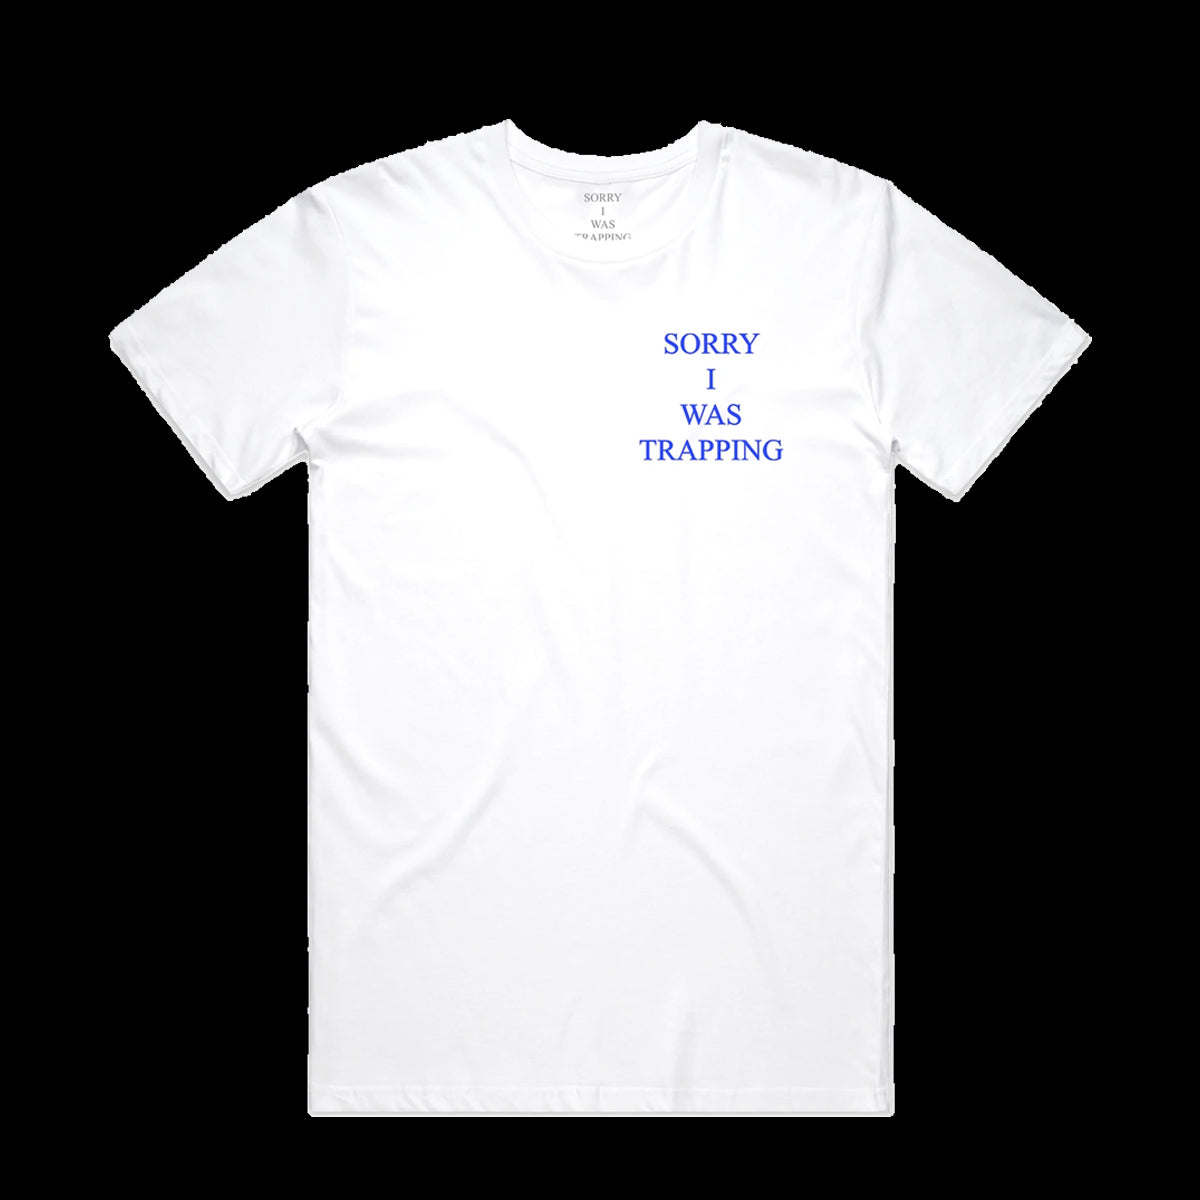 "SORRY I WAS TRAPPING" Angel Tee - White/Royal Blue